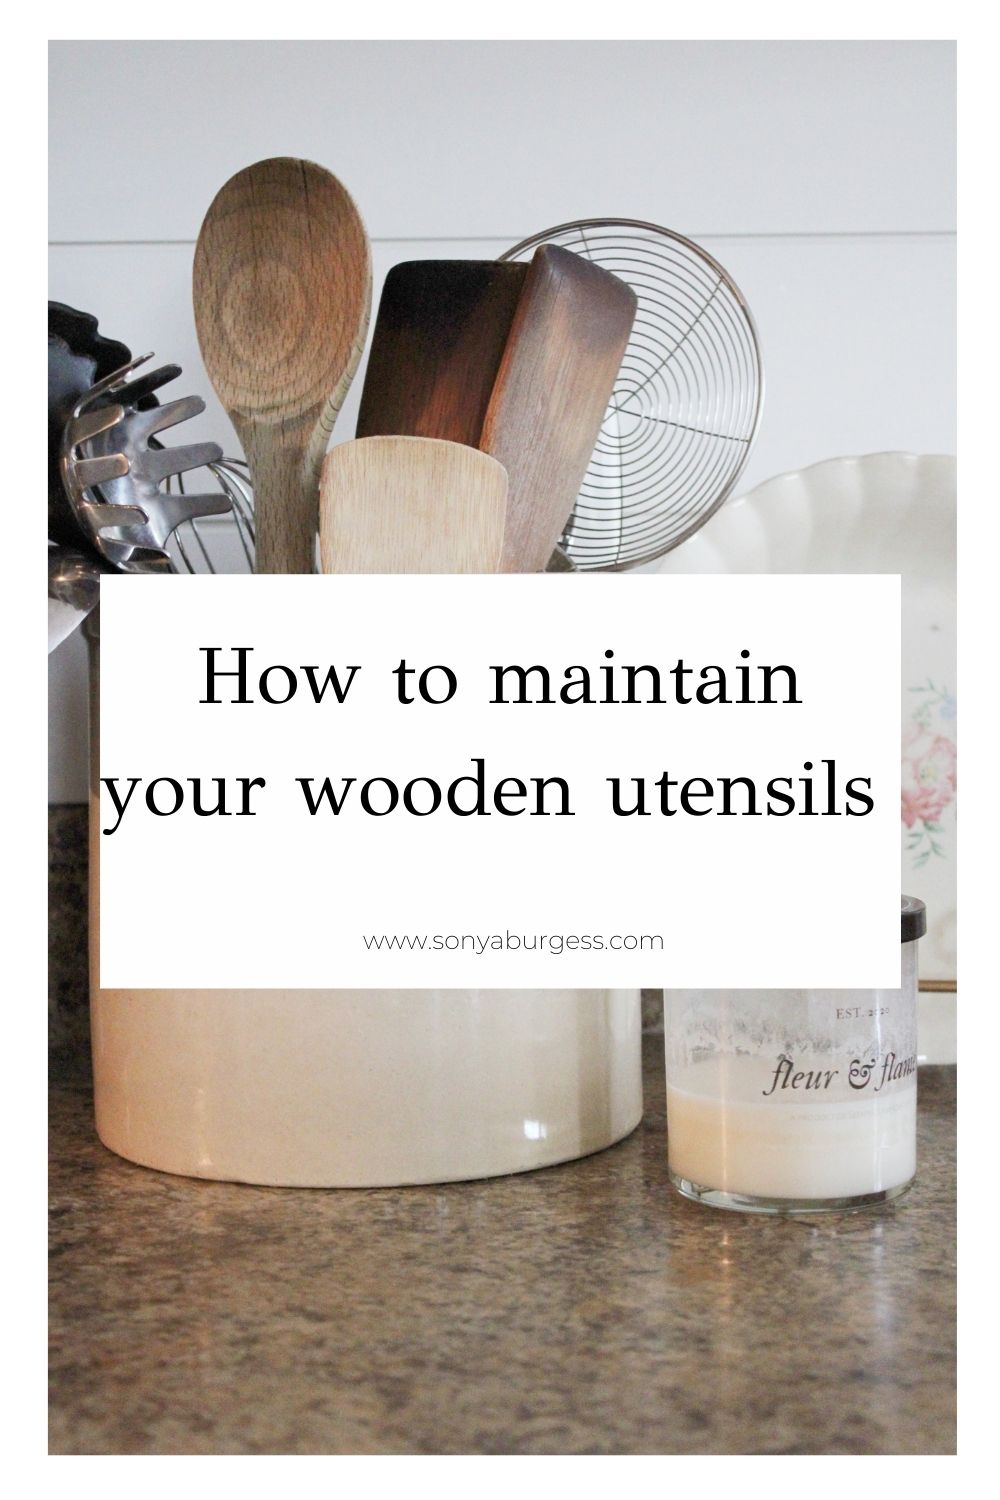 How to maintain your wooden utensils